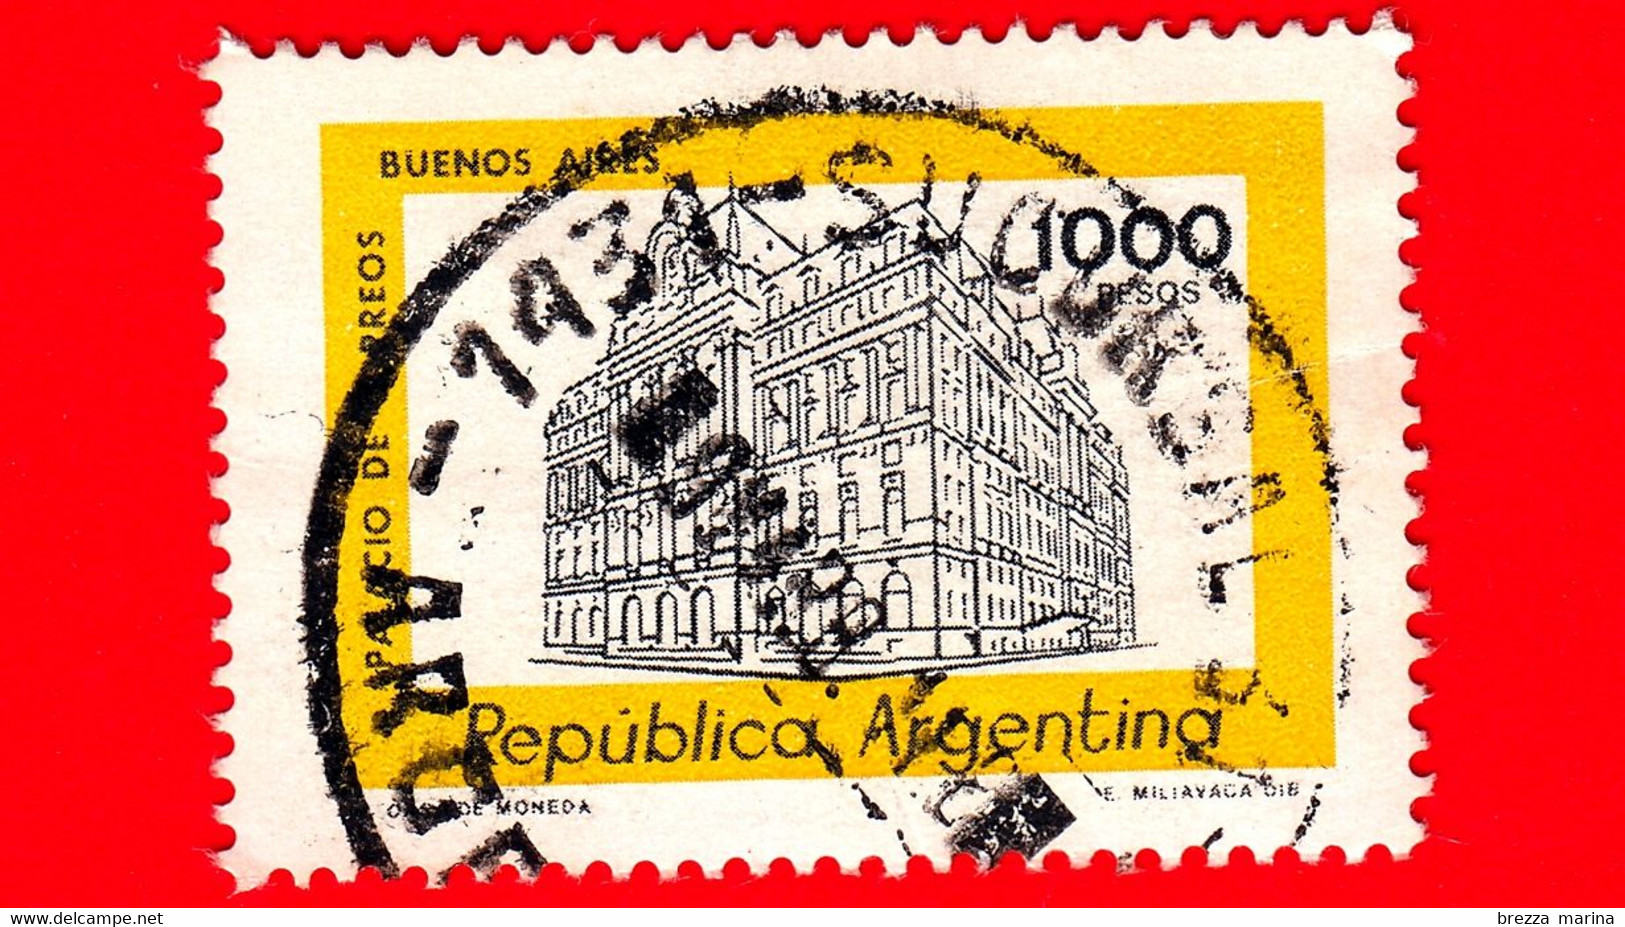 ARGENTINA - Usato -  1980 - Palazzo Delle Poste -  Buenos Aires - 1000 - Used Stamps